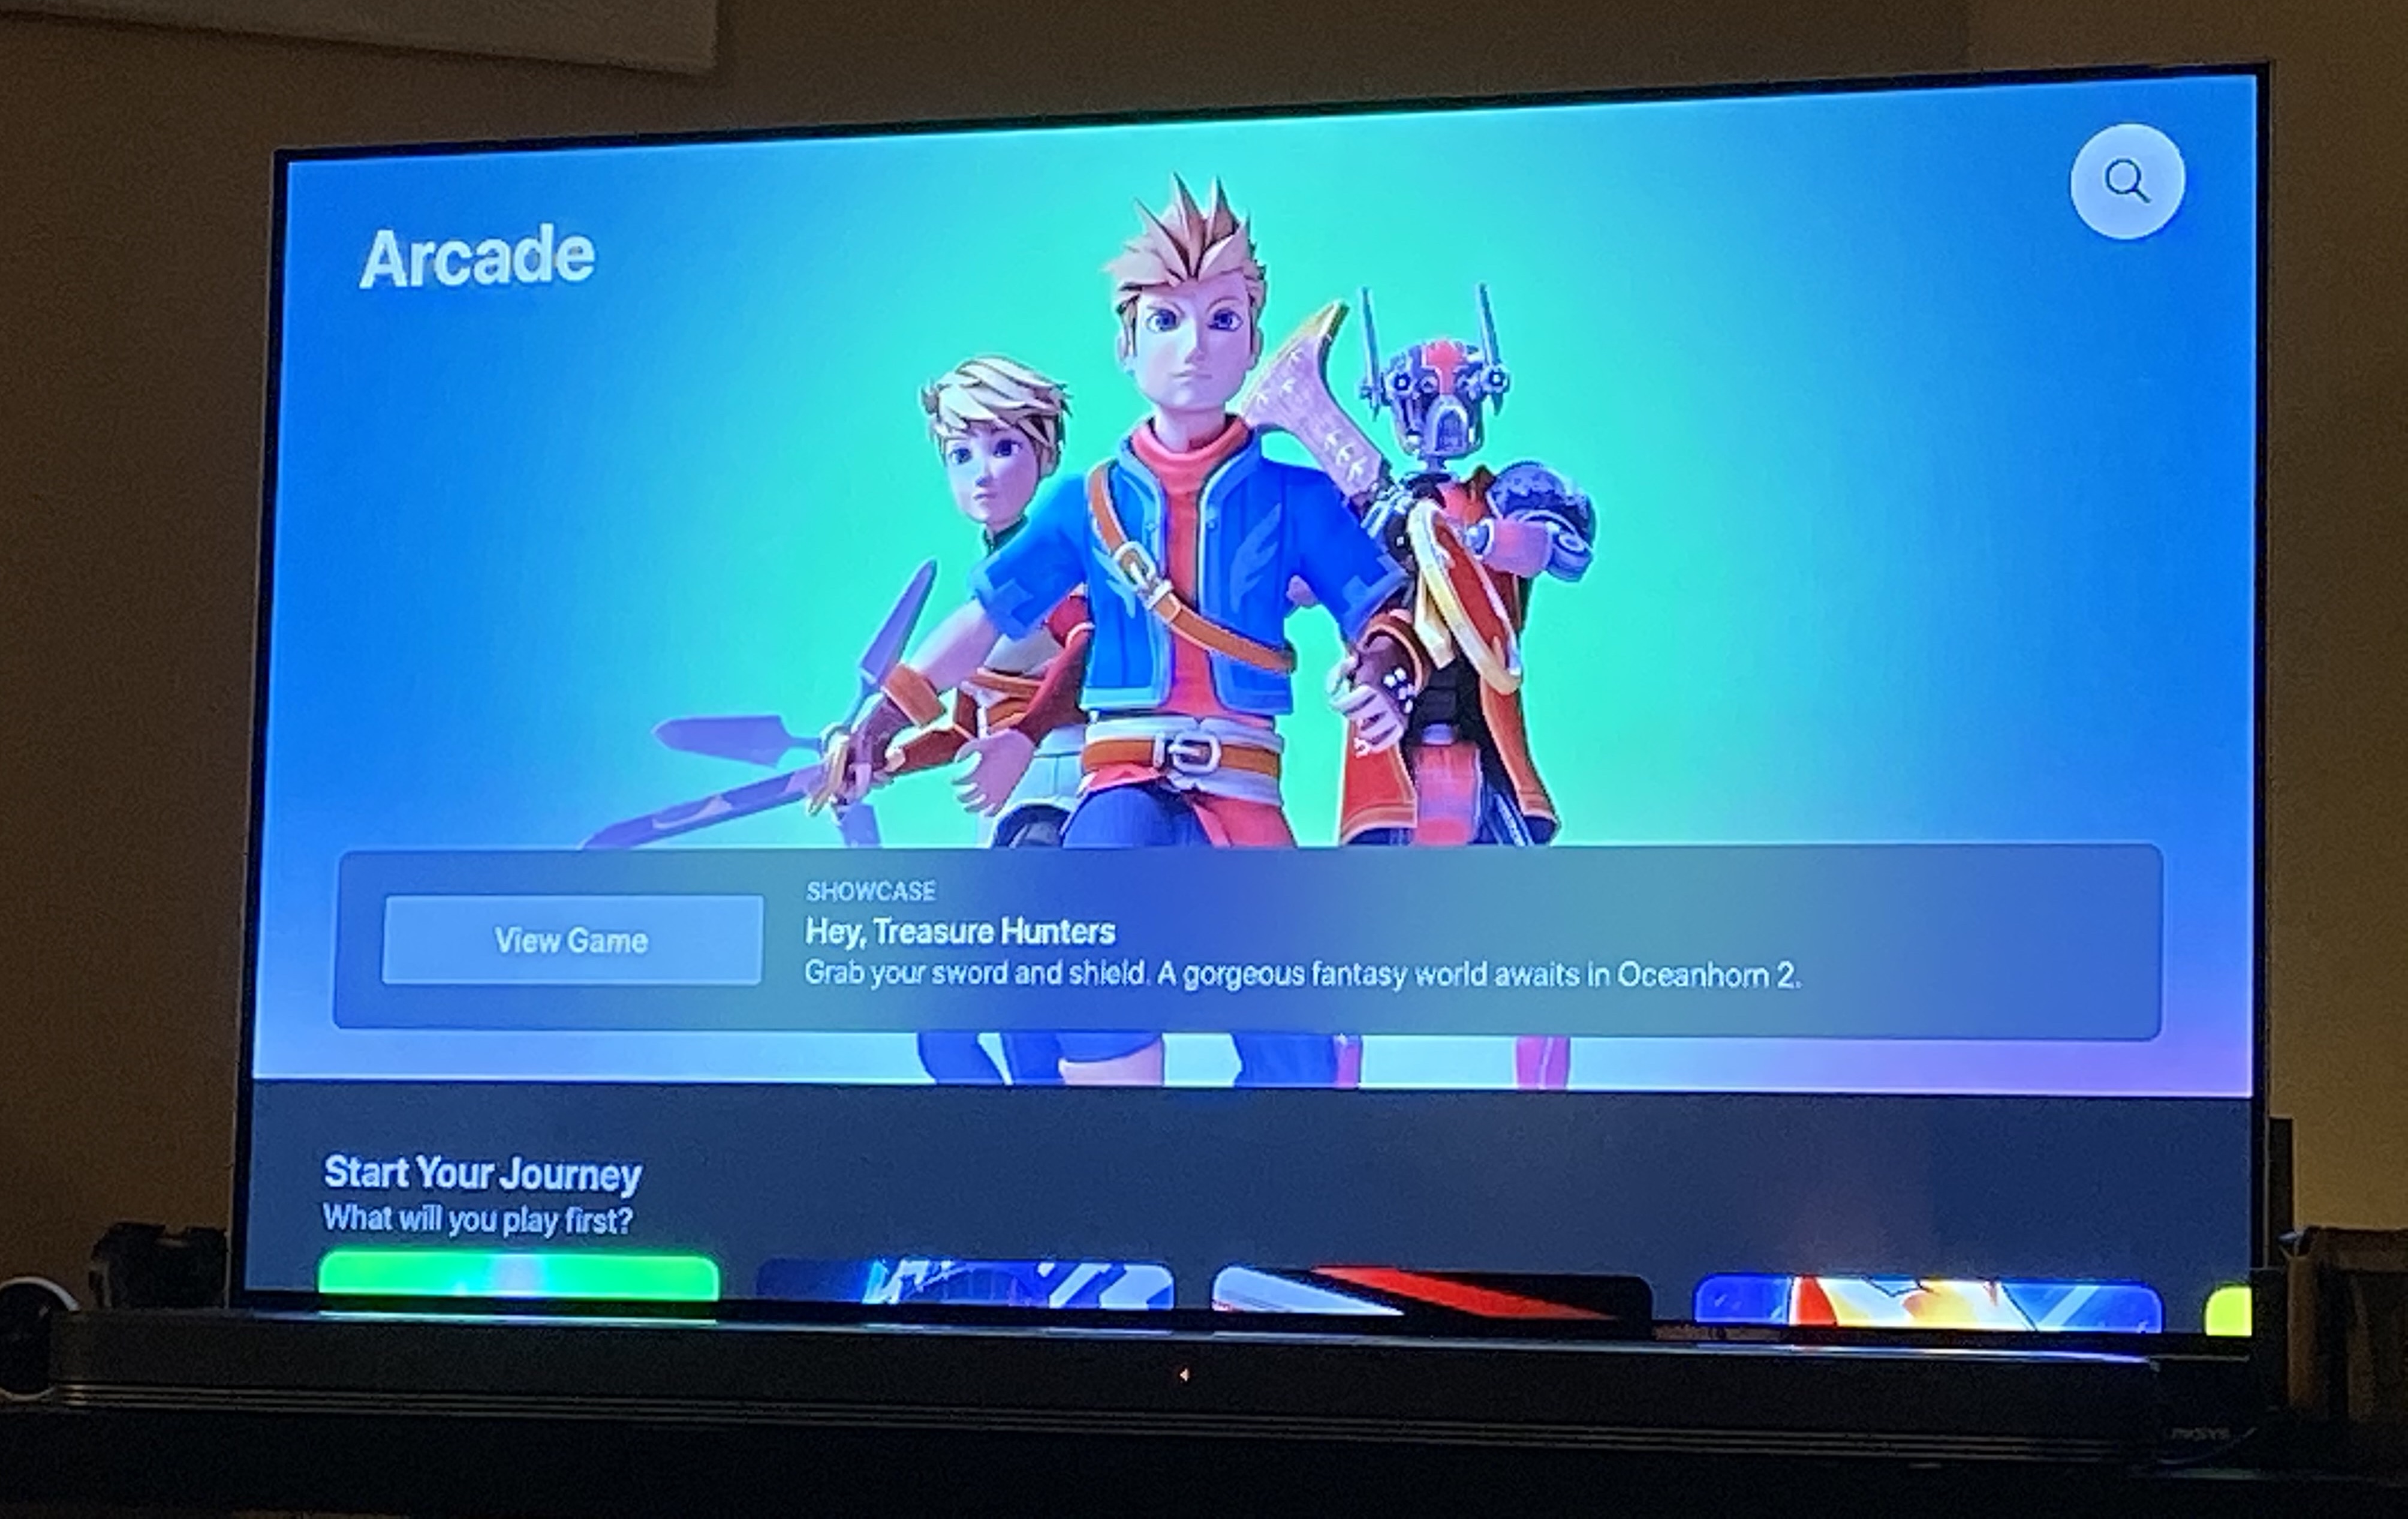 Arcade games launch on Apple TV ahead of tvOS 13 release - 9to5Mac